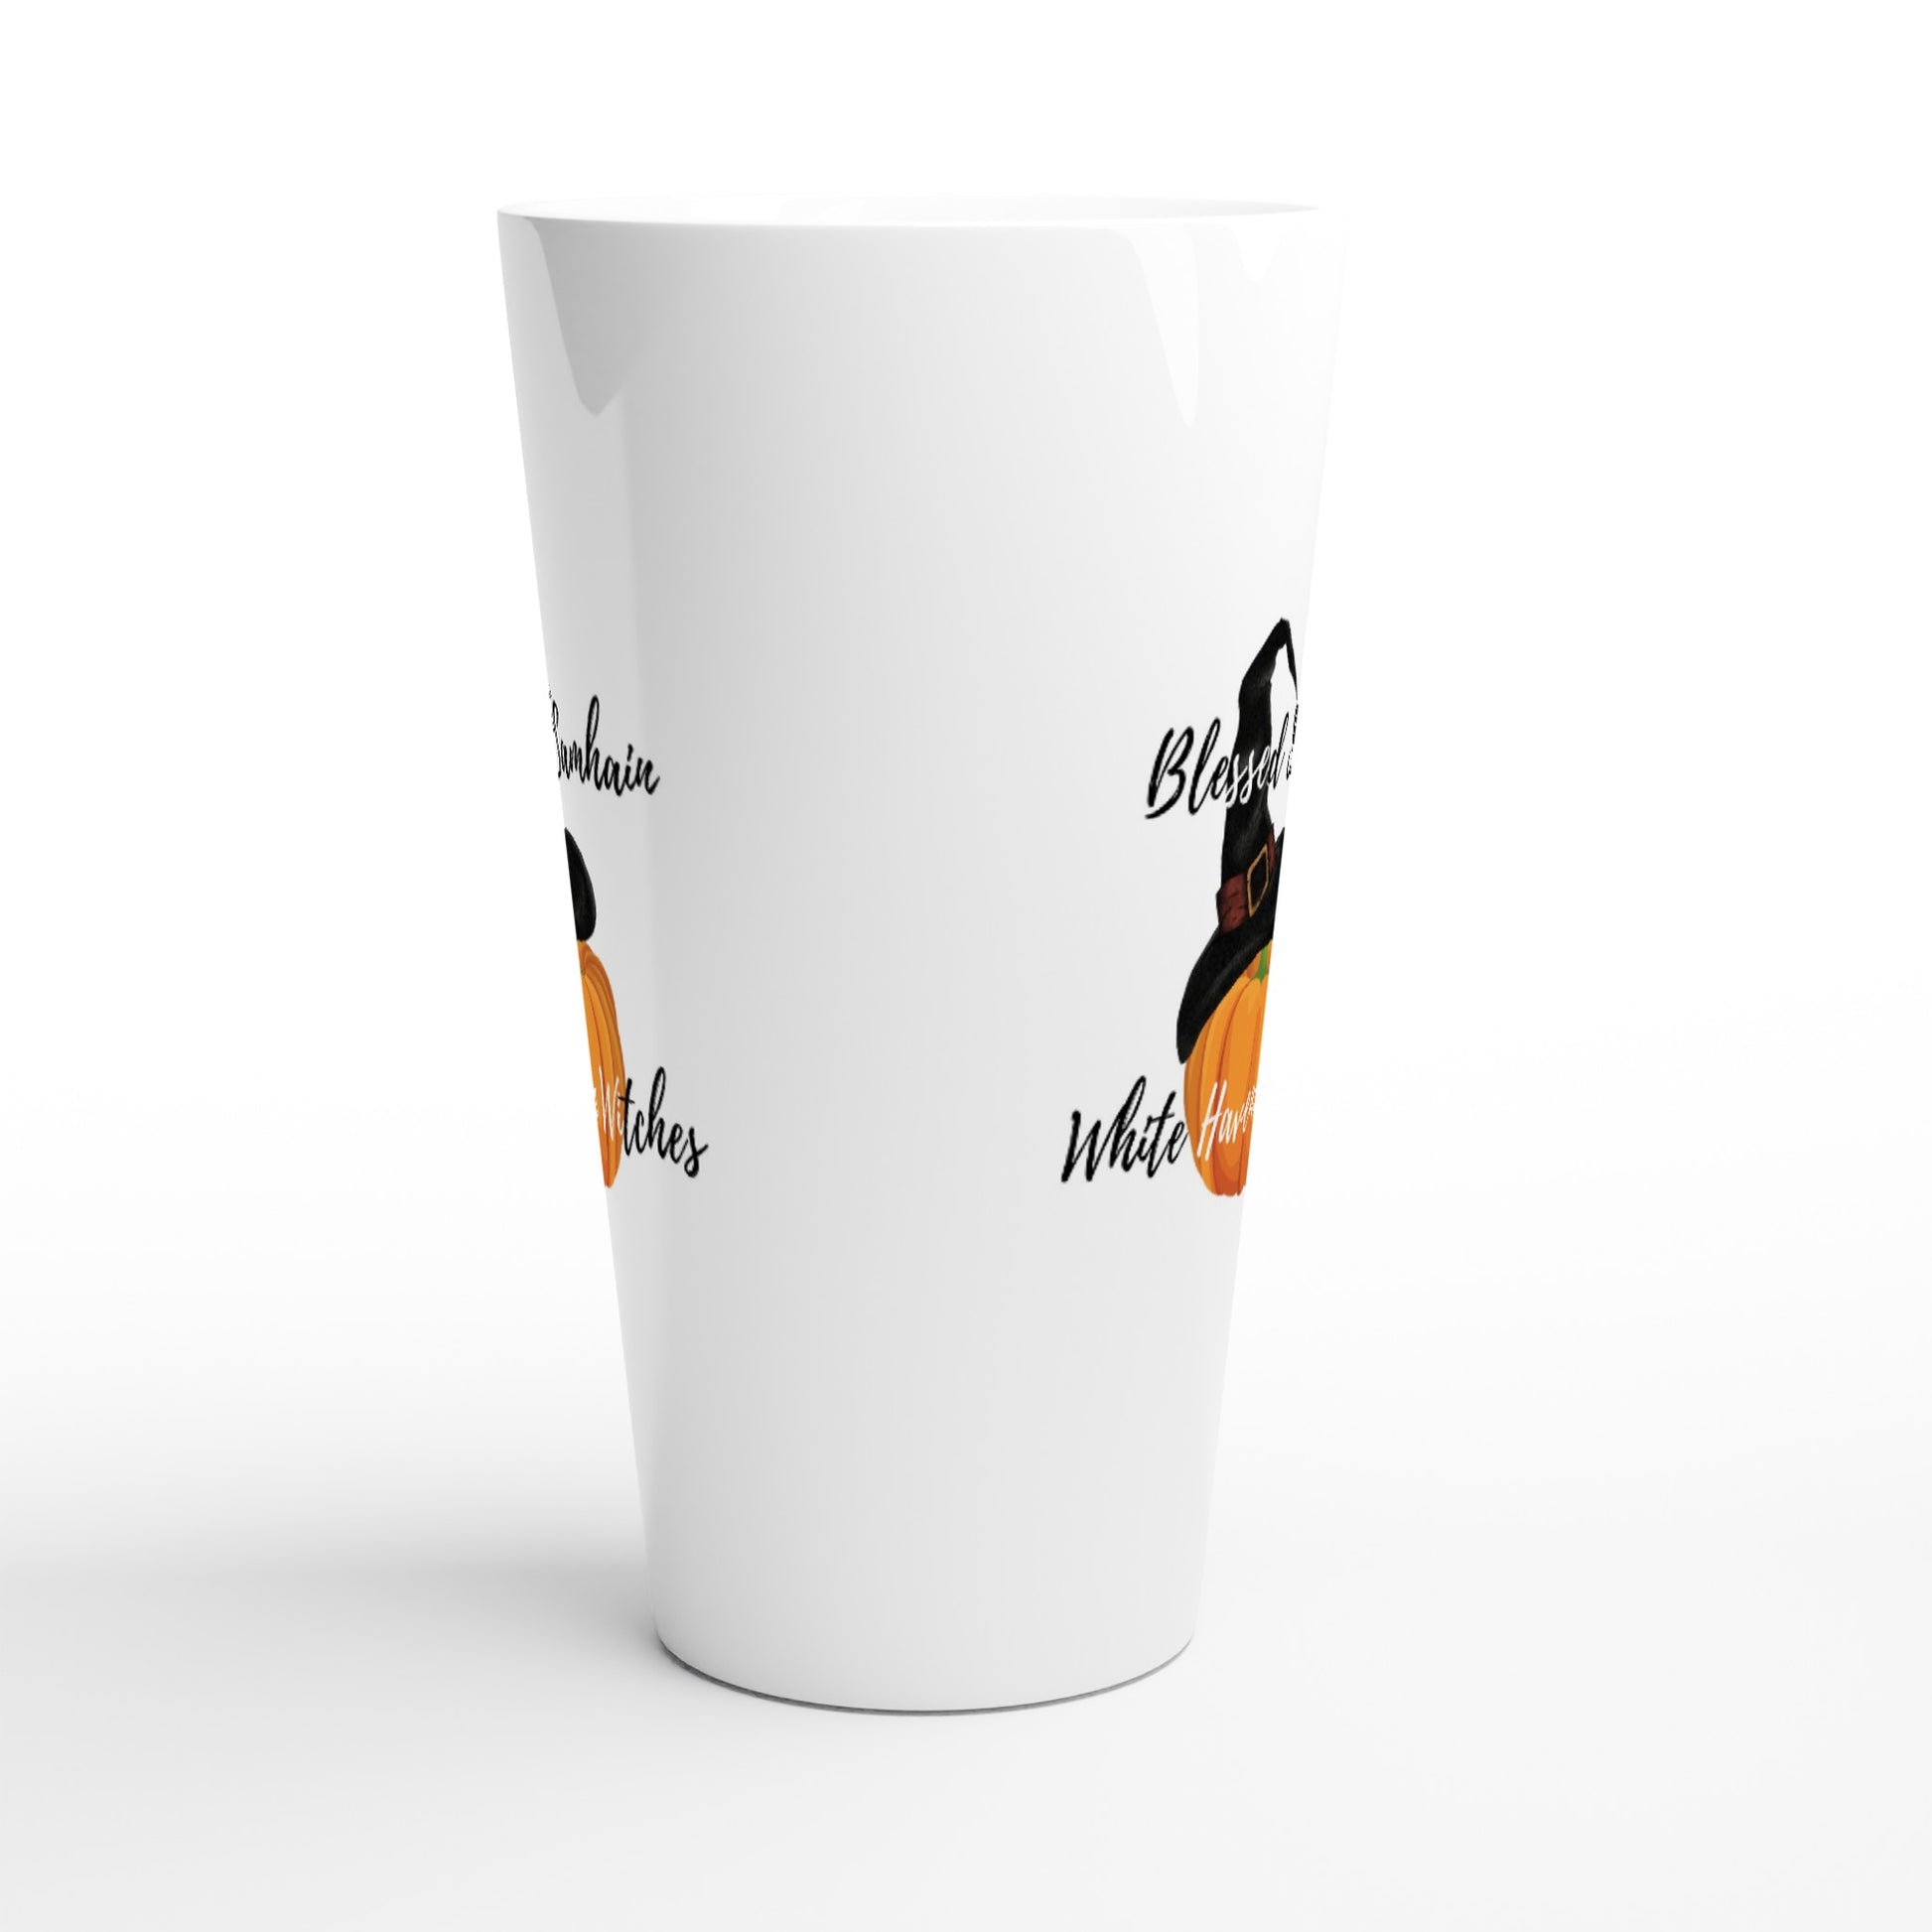 Blessed Smahin White Haven Witches latte mug